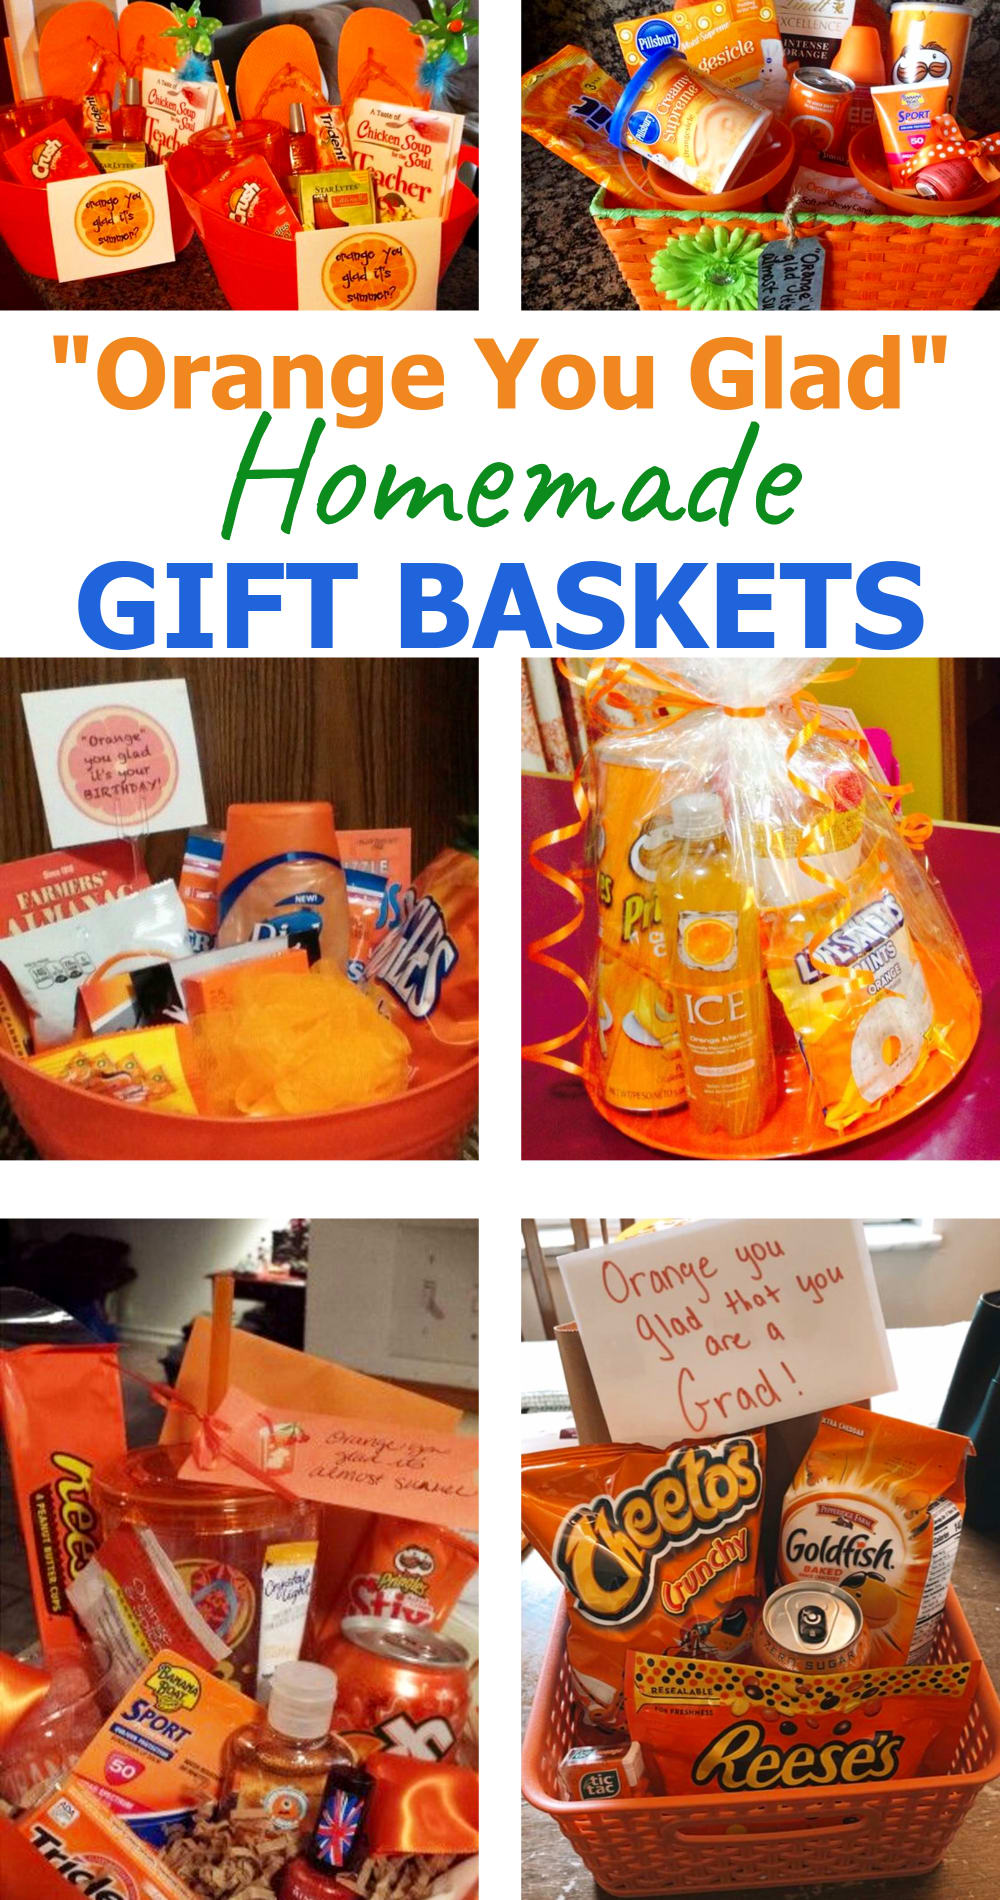 Homemade Orange You Glad Gift Baskets - easy, inexpensive and CREATIVE DIY gift basket ideas to make for teacher appreciation, graduation, birthdays, co-worker gifts, retirement, Mother's Day, end of school year, summer, new home housewarming gifts, door dash thank you gift baskets, best friends, boyfriends and more.